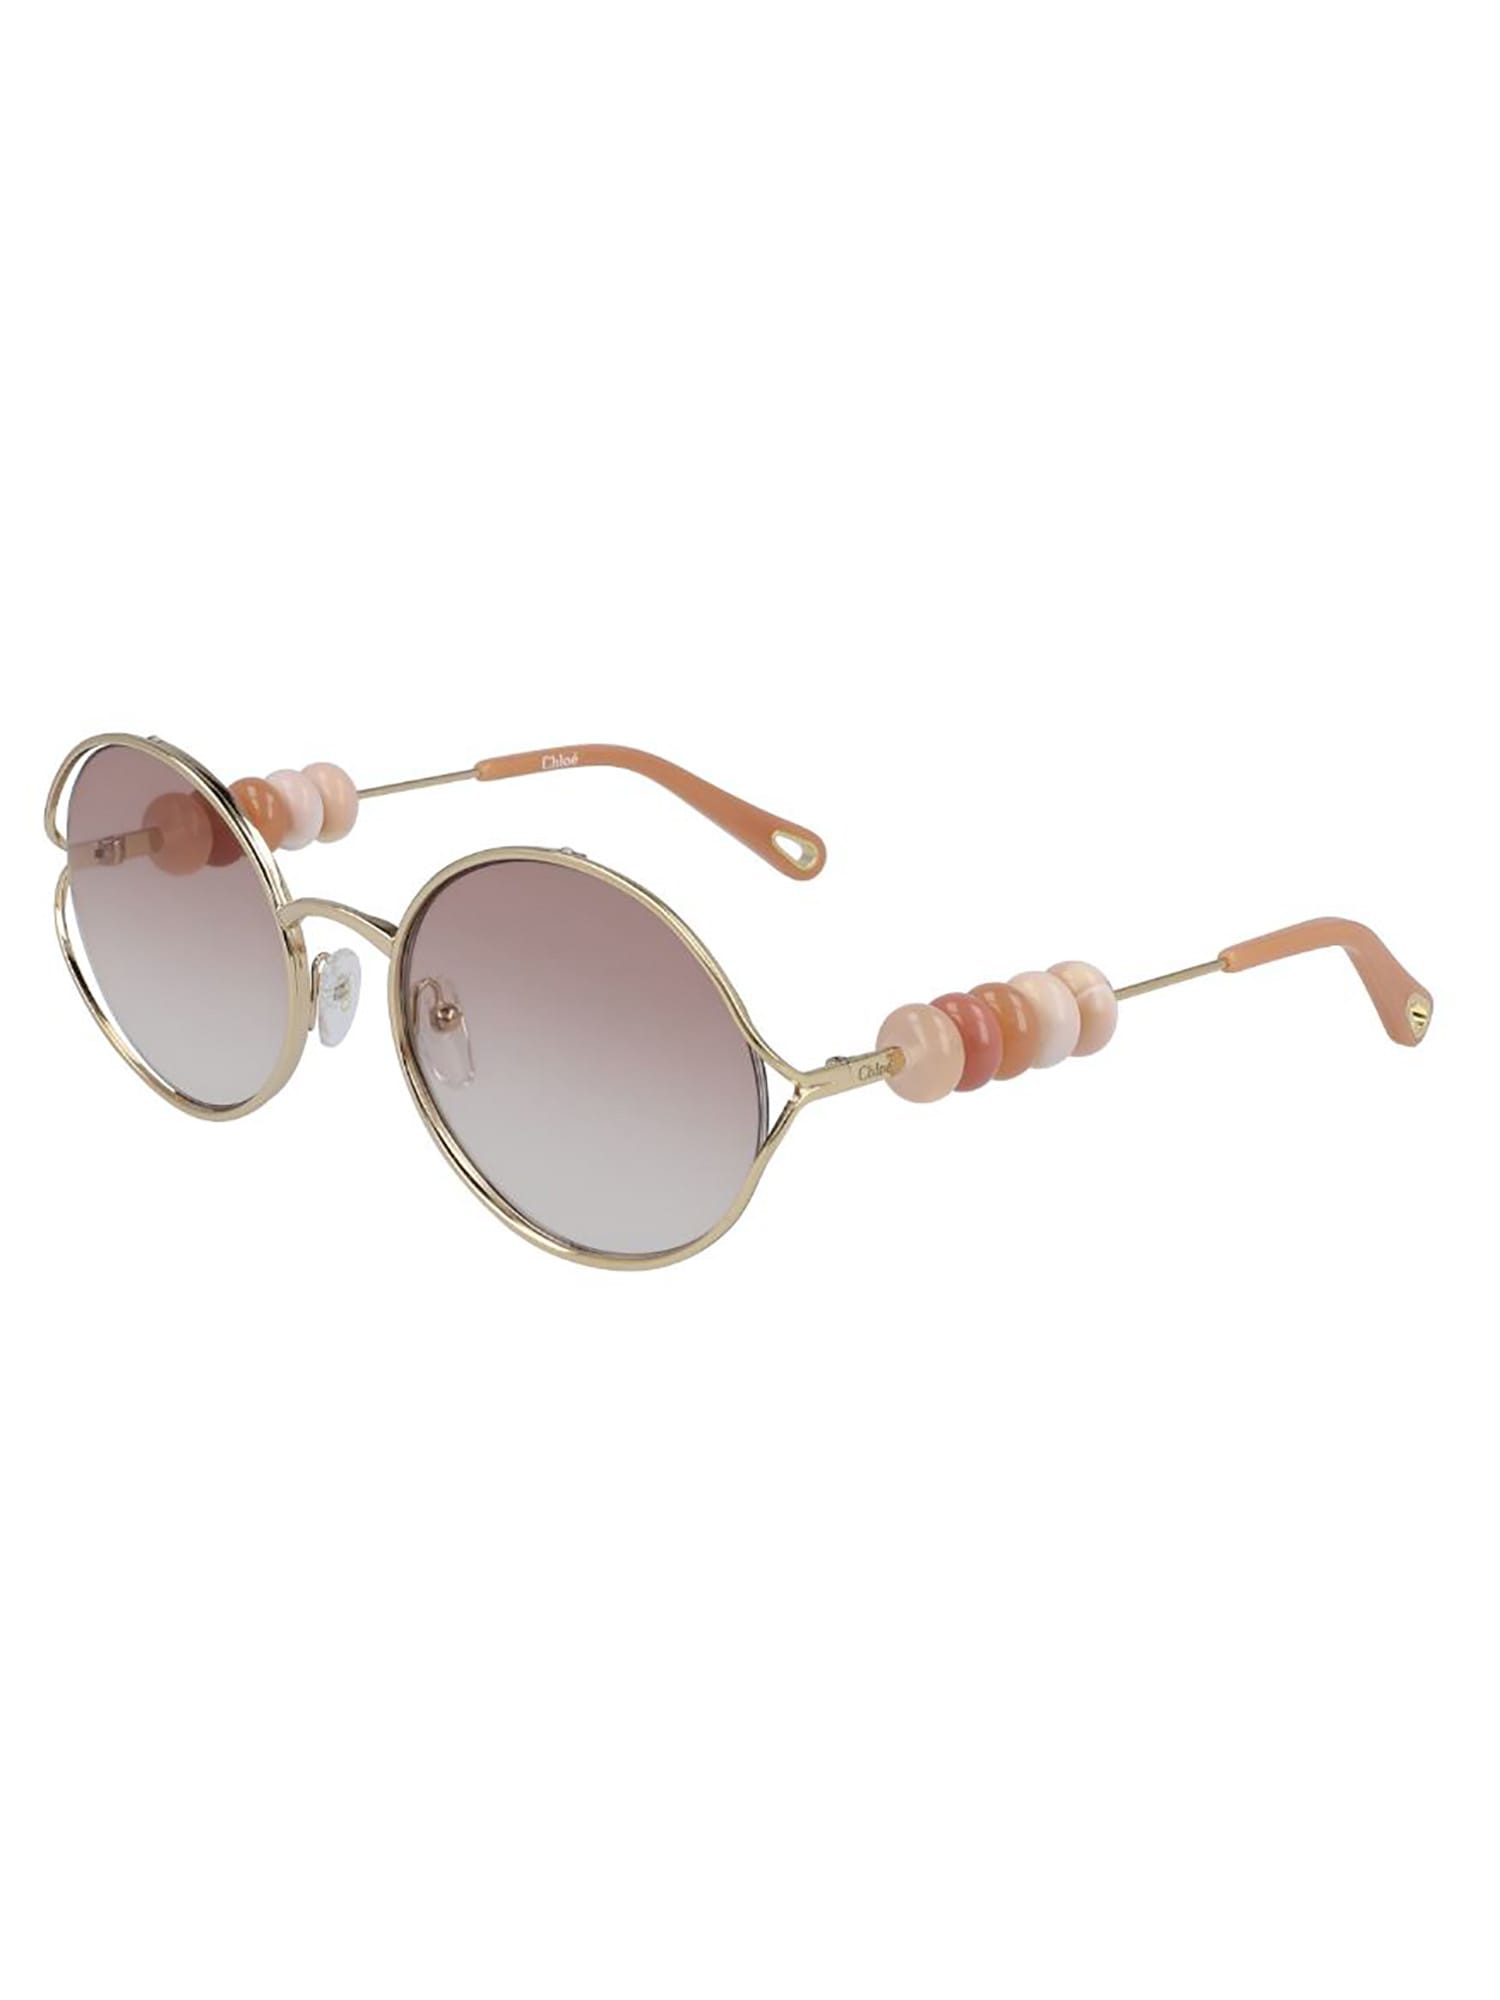 Chloé Ce167s 42834 Sunglasses In Gold Gradient Brown